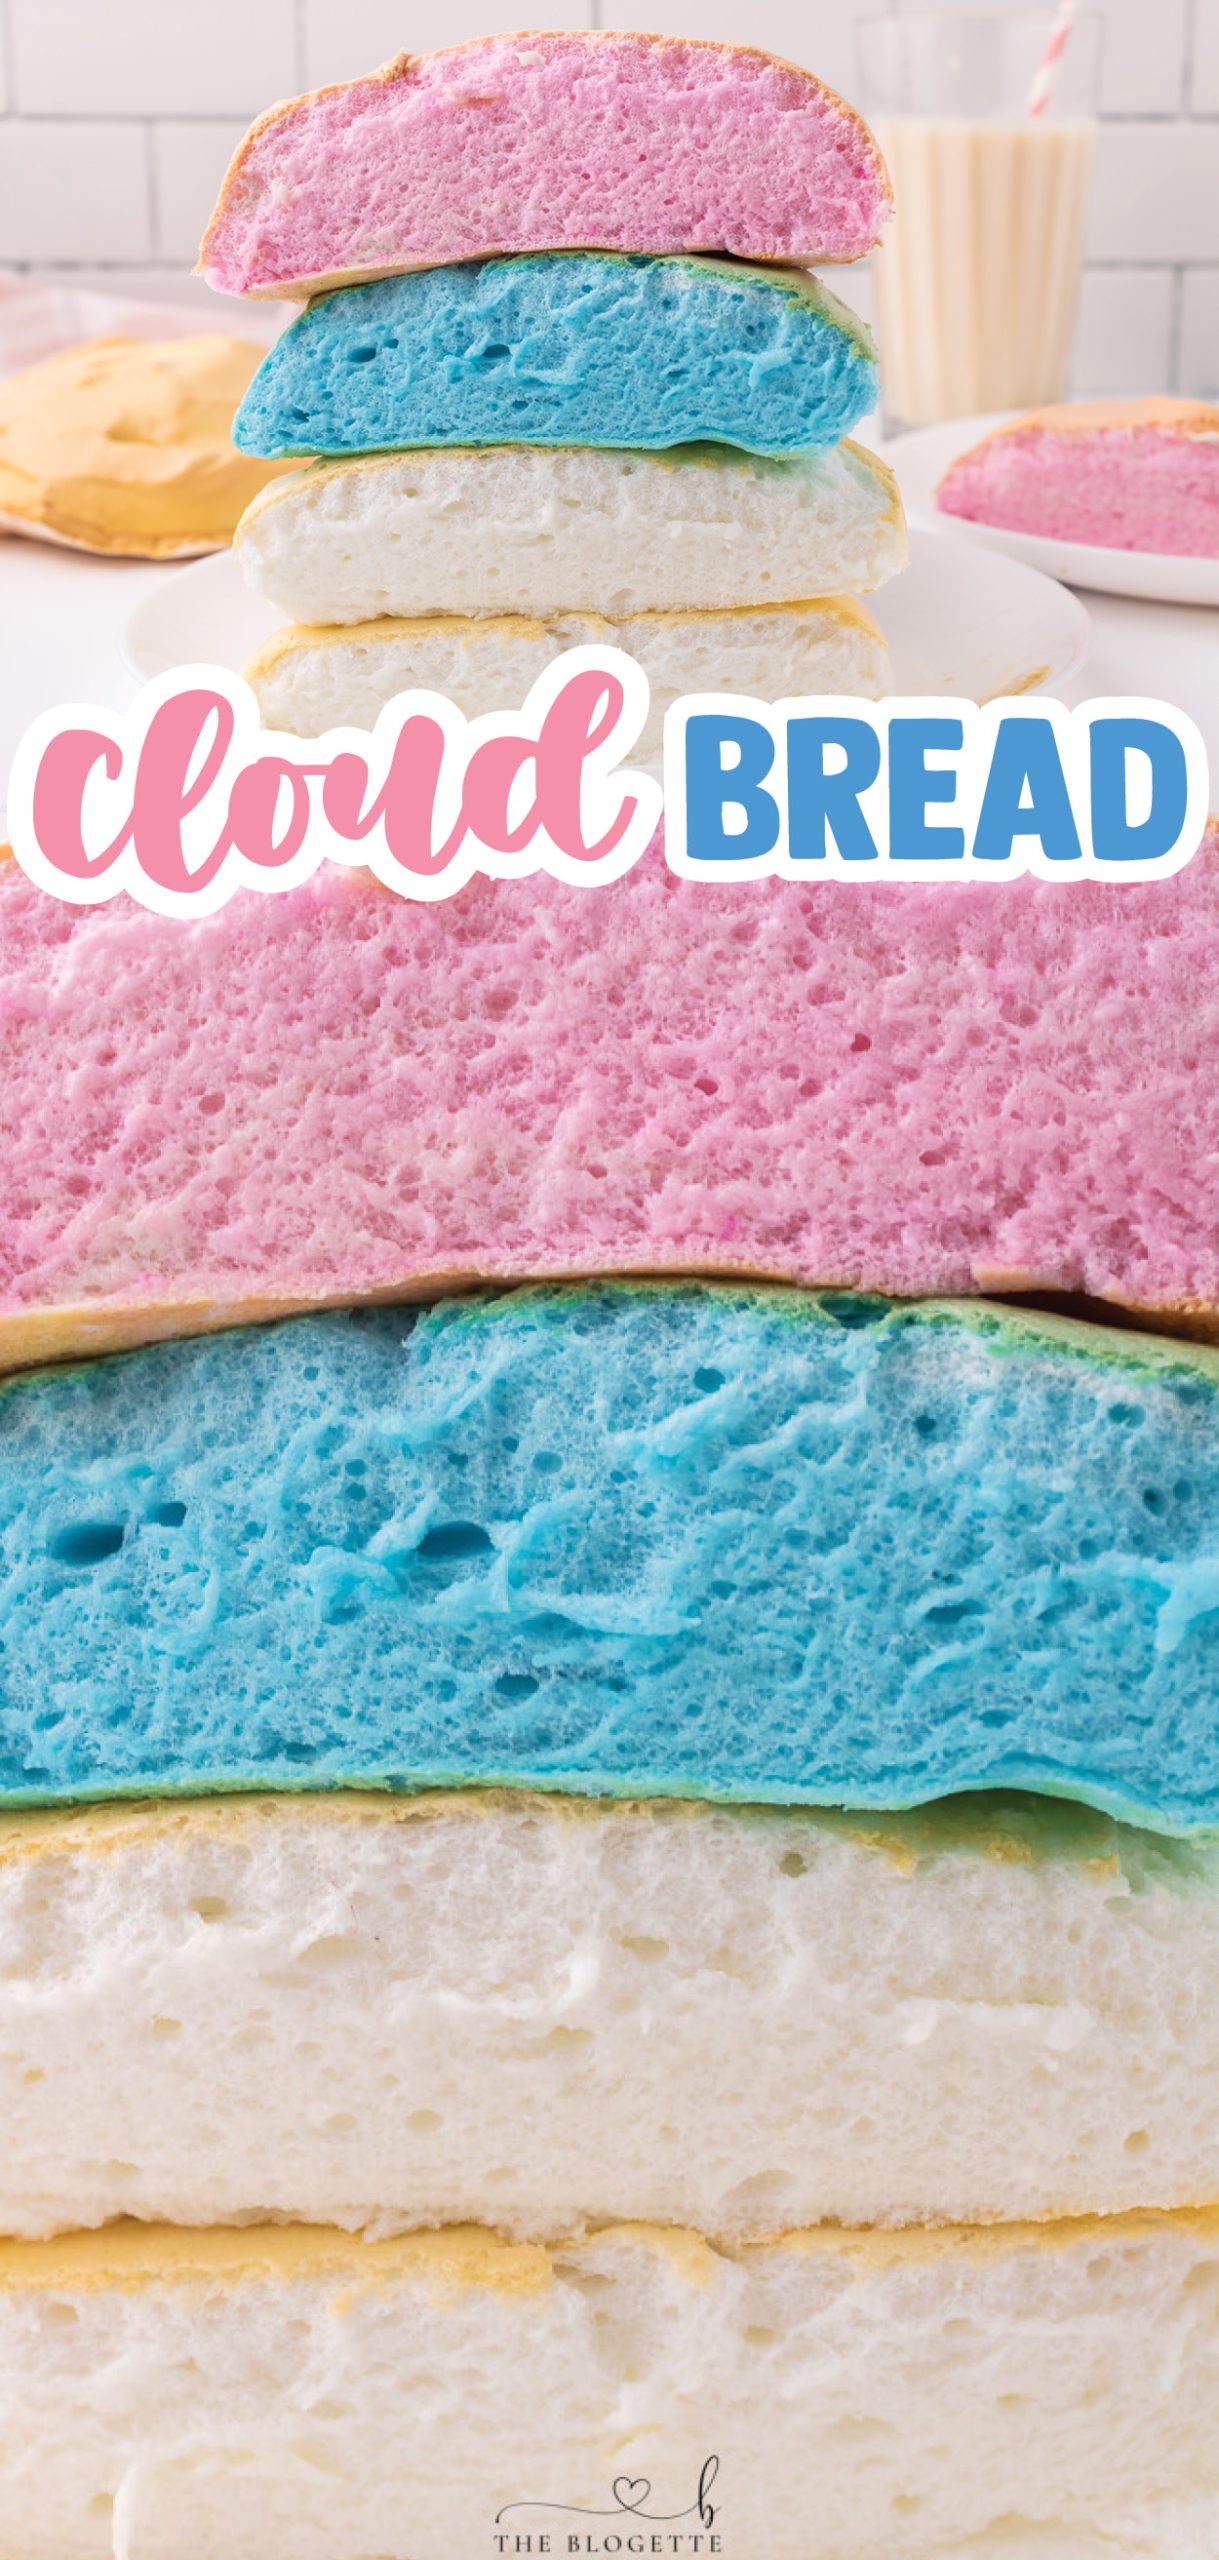 Soft and fluffy cloud bread is easy to make and tastes almost like cotton candy! It is fun to rip open, revealing the colorful bread inside.